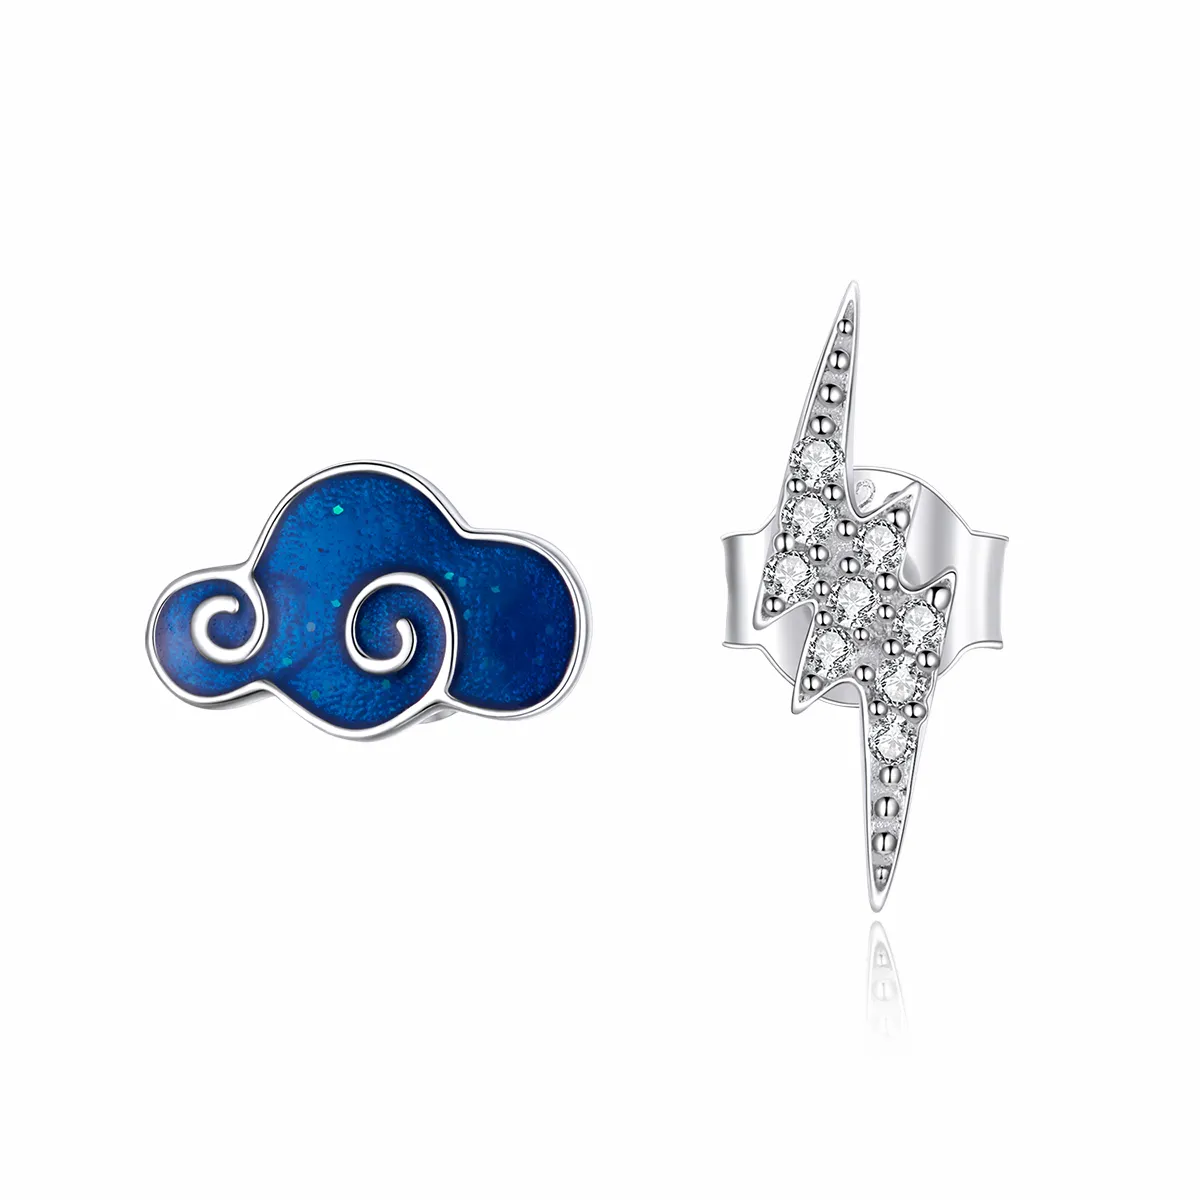 Pandora Style Silver Clouds And Lightning Stud Earrings - BSE429